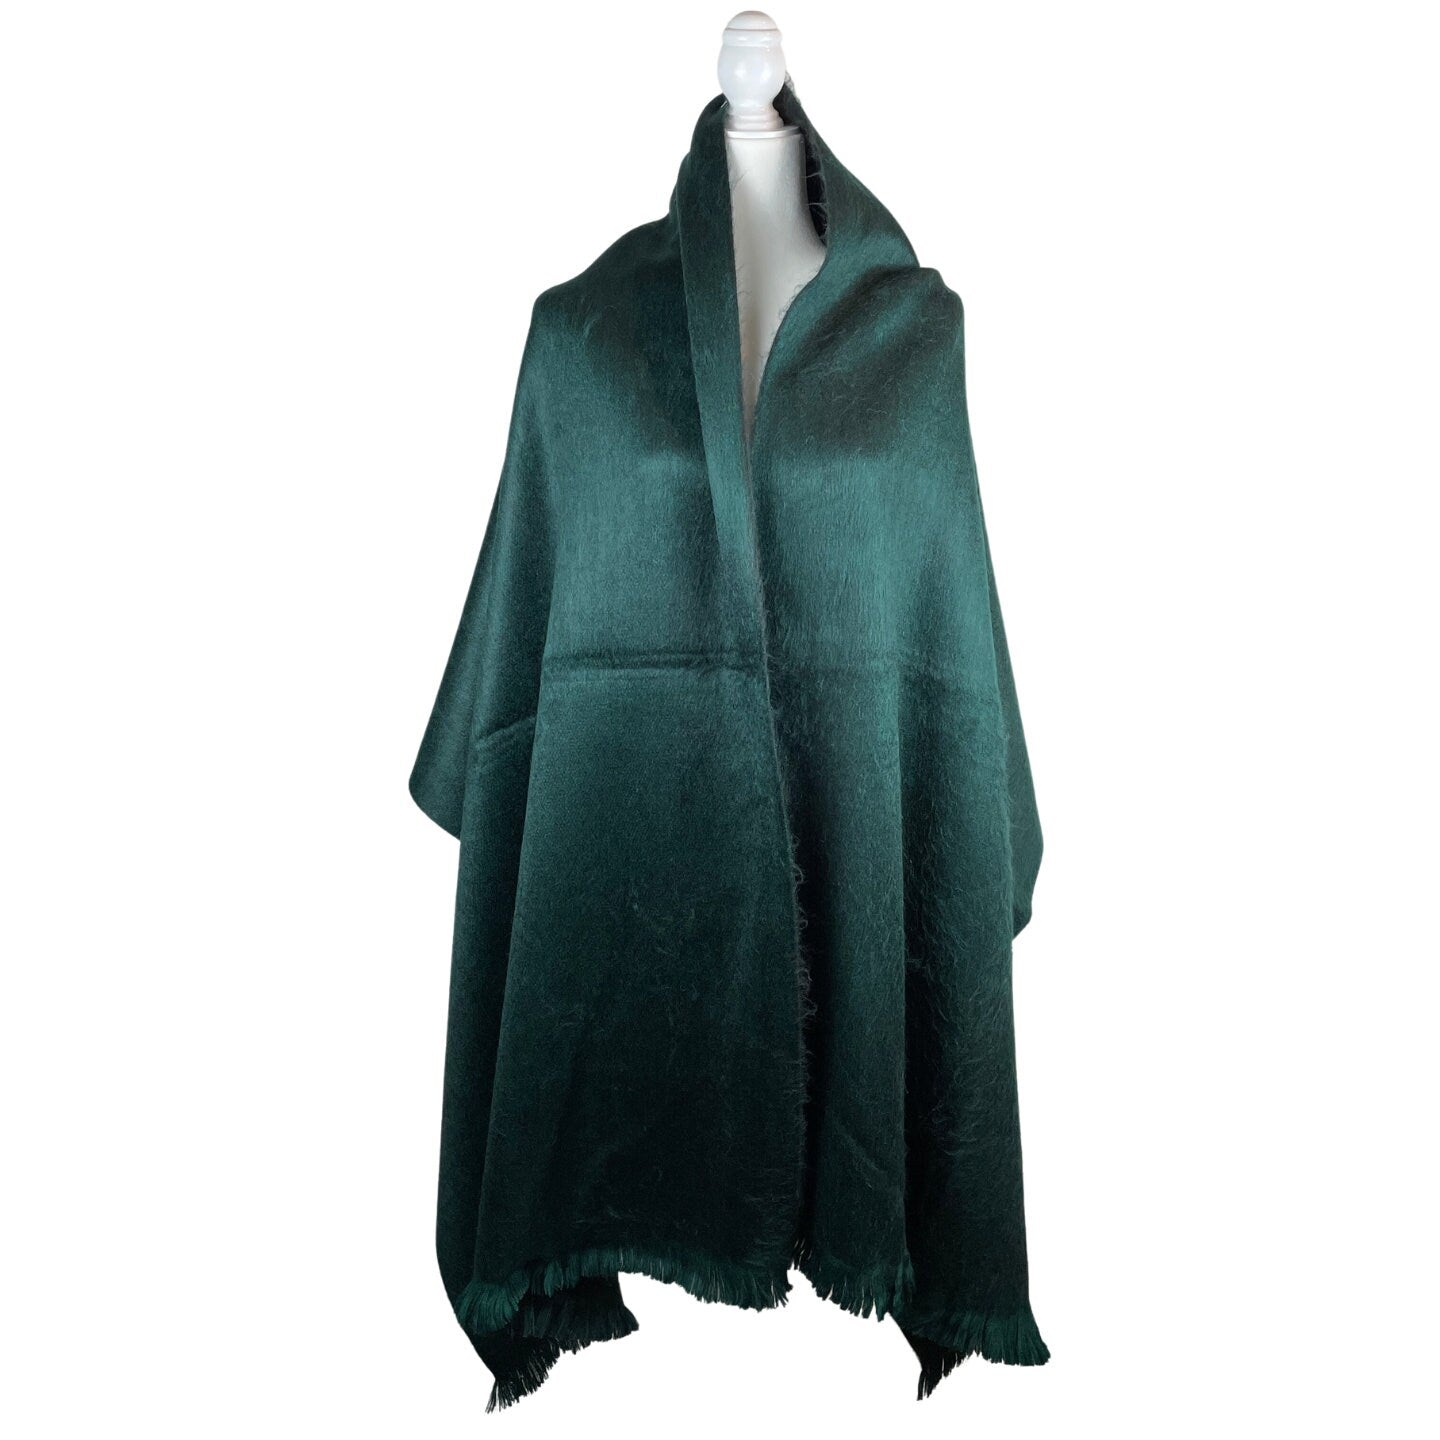 Cozy Reversible Soft Wrap Bridal Cover Up | Soft Shawl for Wedding | Emerald Green Black